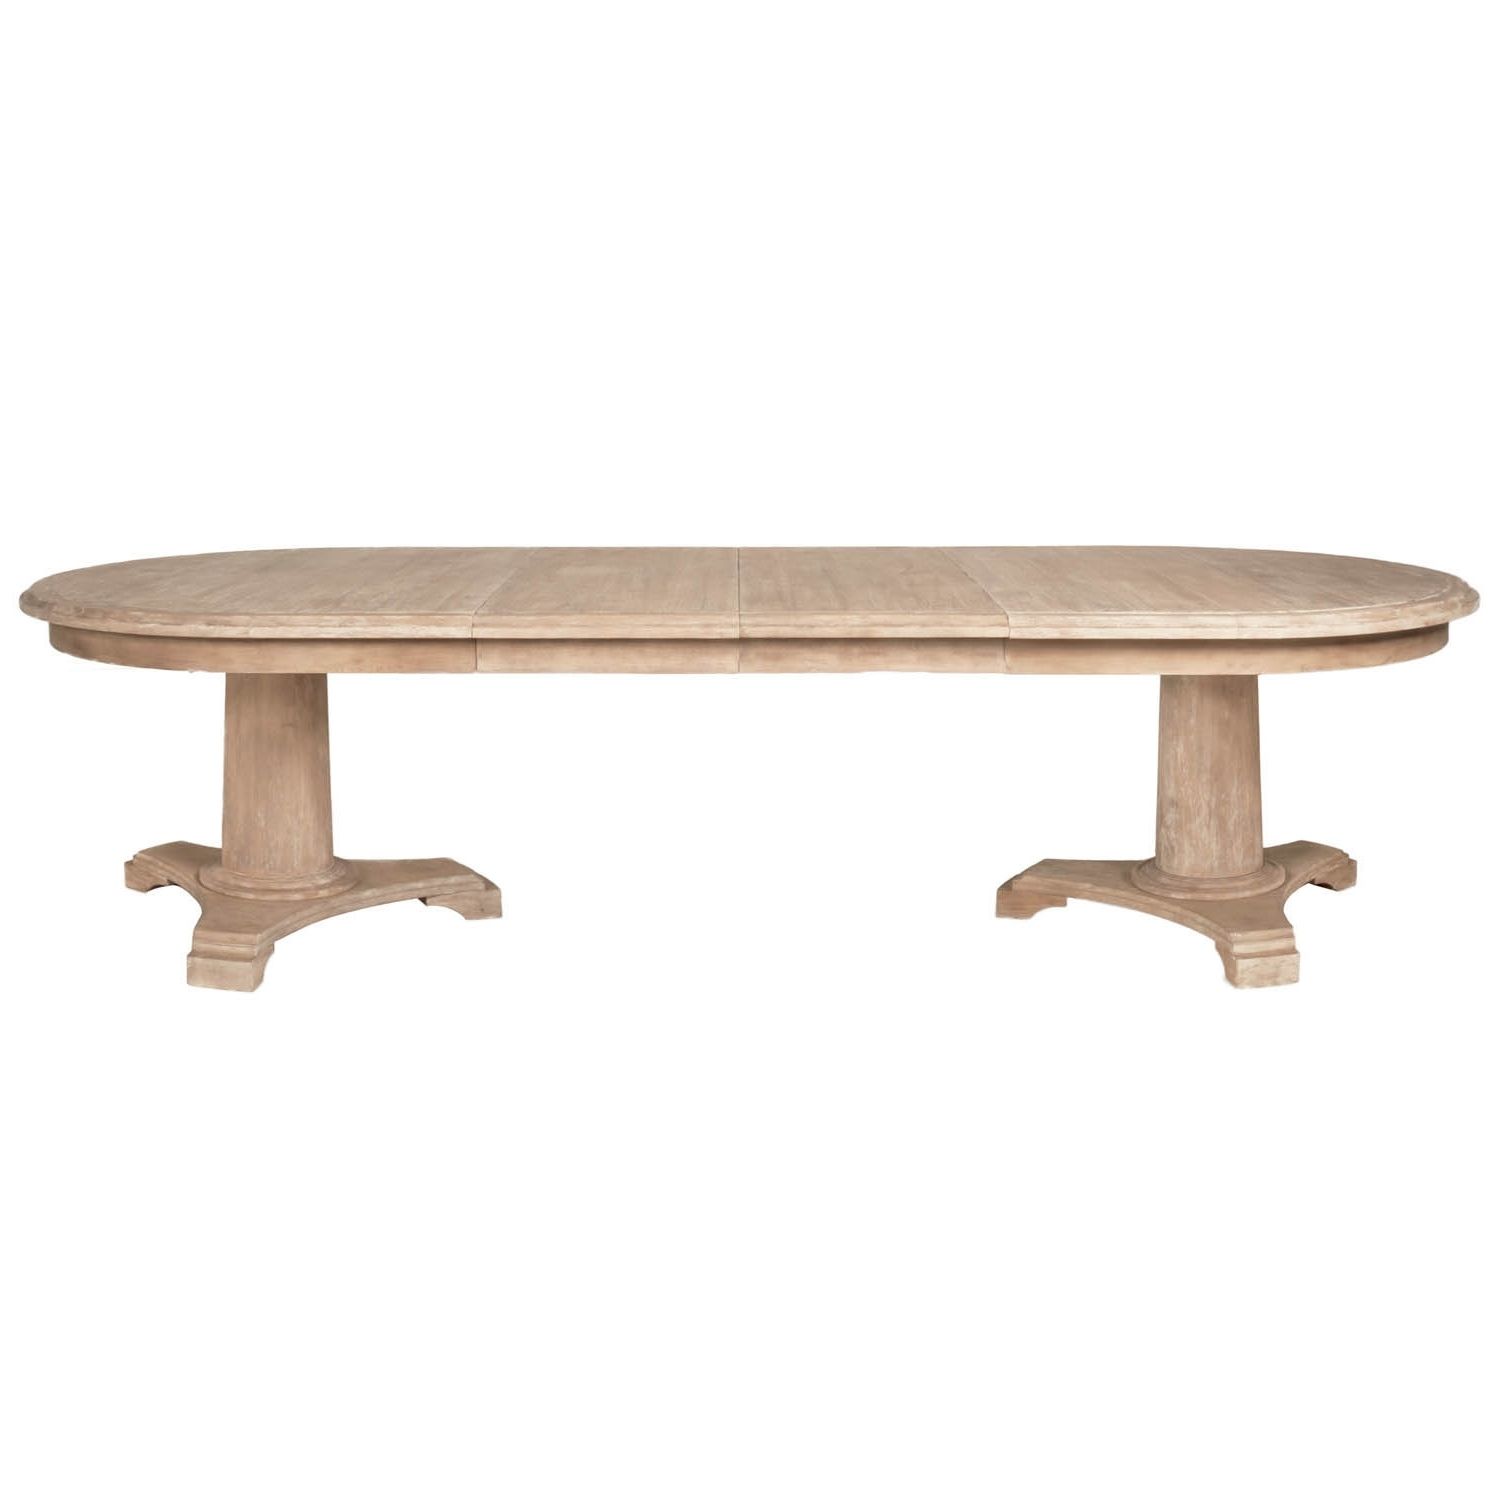 Famous Shop Brittany Beige Acacia Wood Oval Extension Dining Table – Free Intended For Brittany Dining Tables (View 11 of 25)